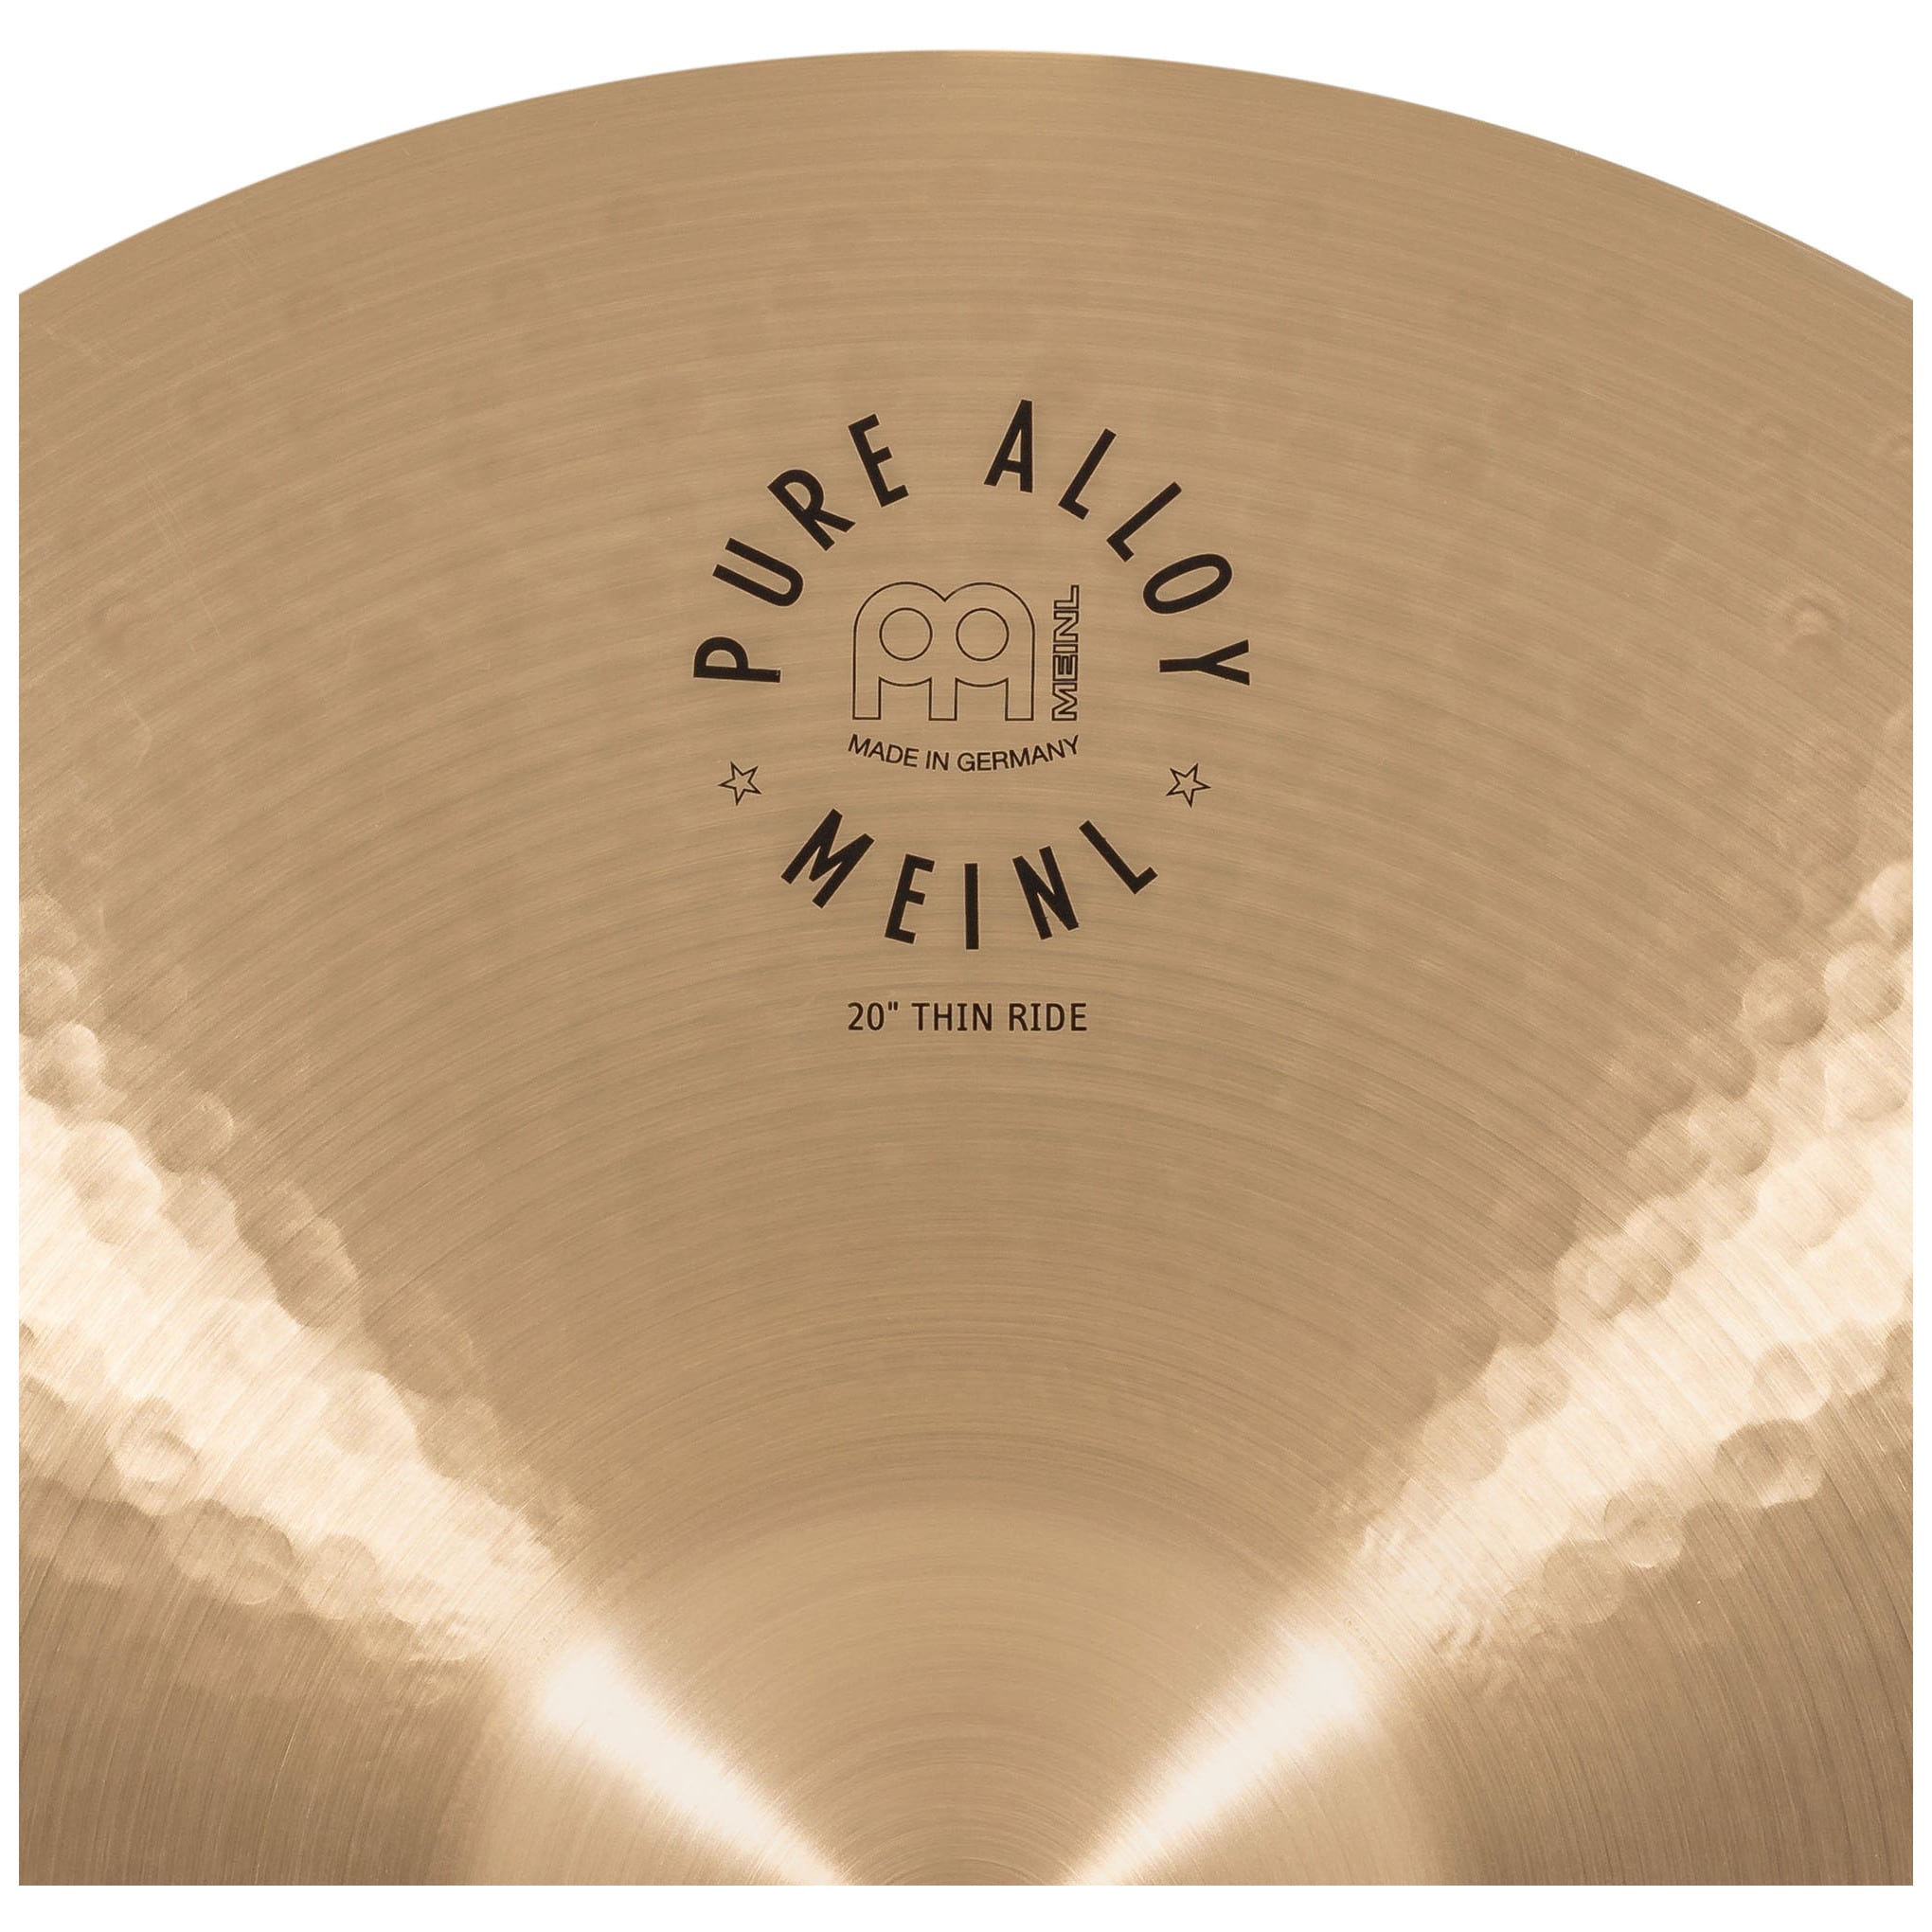 Meinl Cymbals PA20TR - 20" Pure Alloy Thin Ride 7